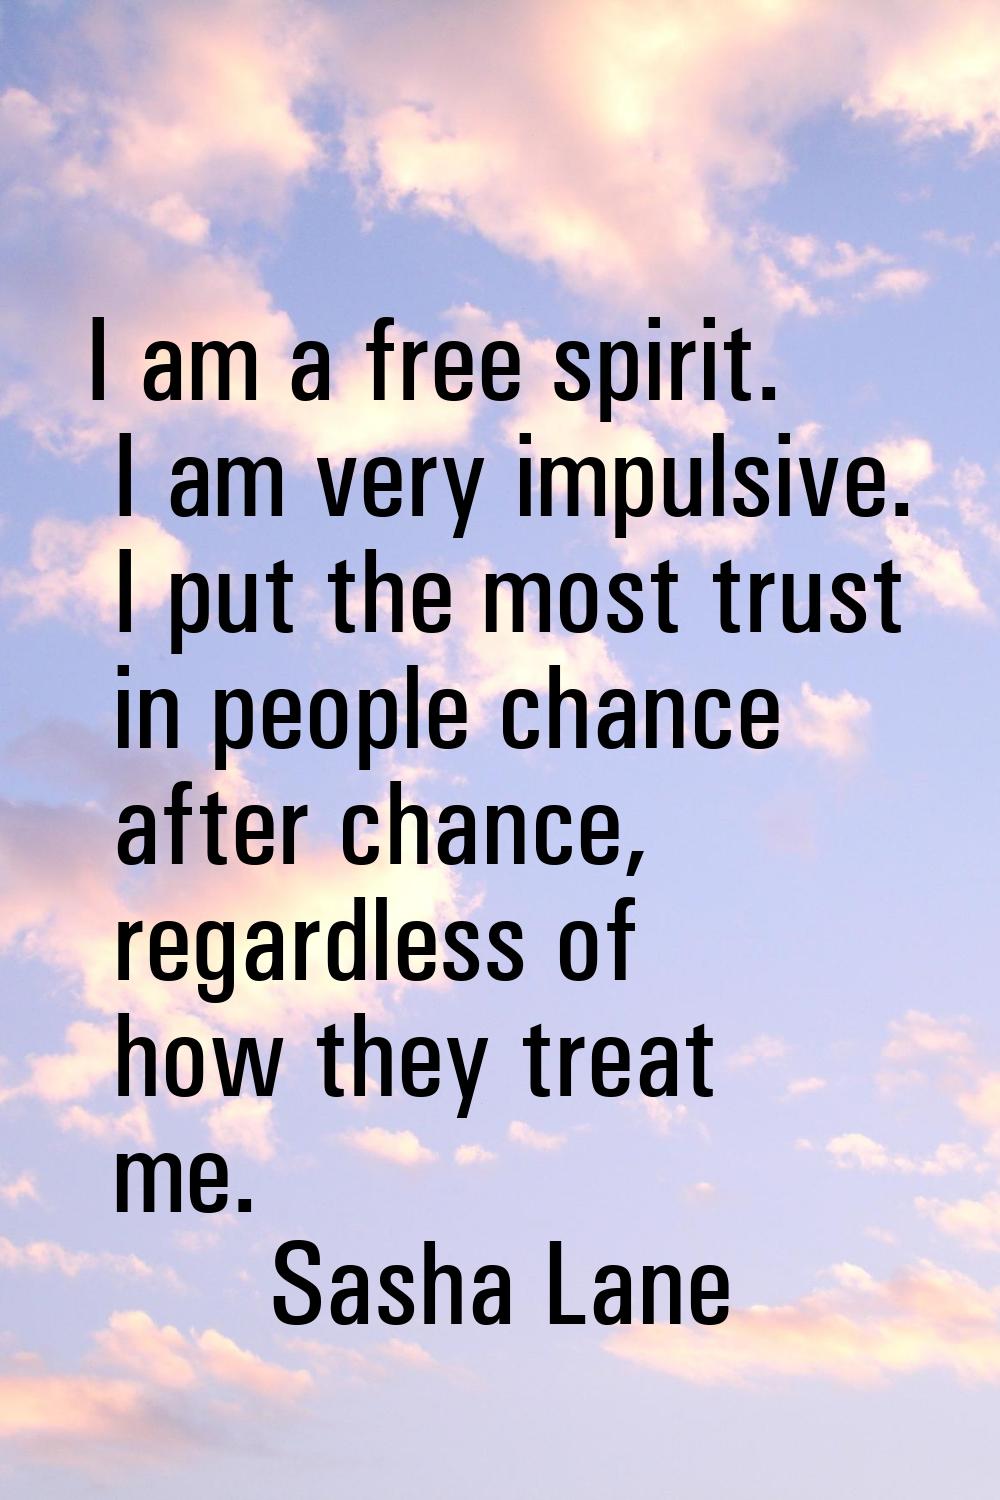 I am a free spirit. I am very impulsive. I put the most trust in people chance after chance, regard